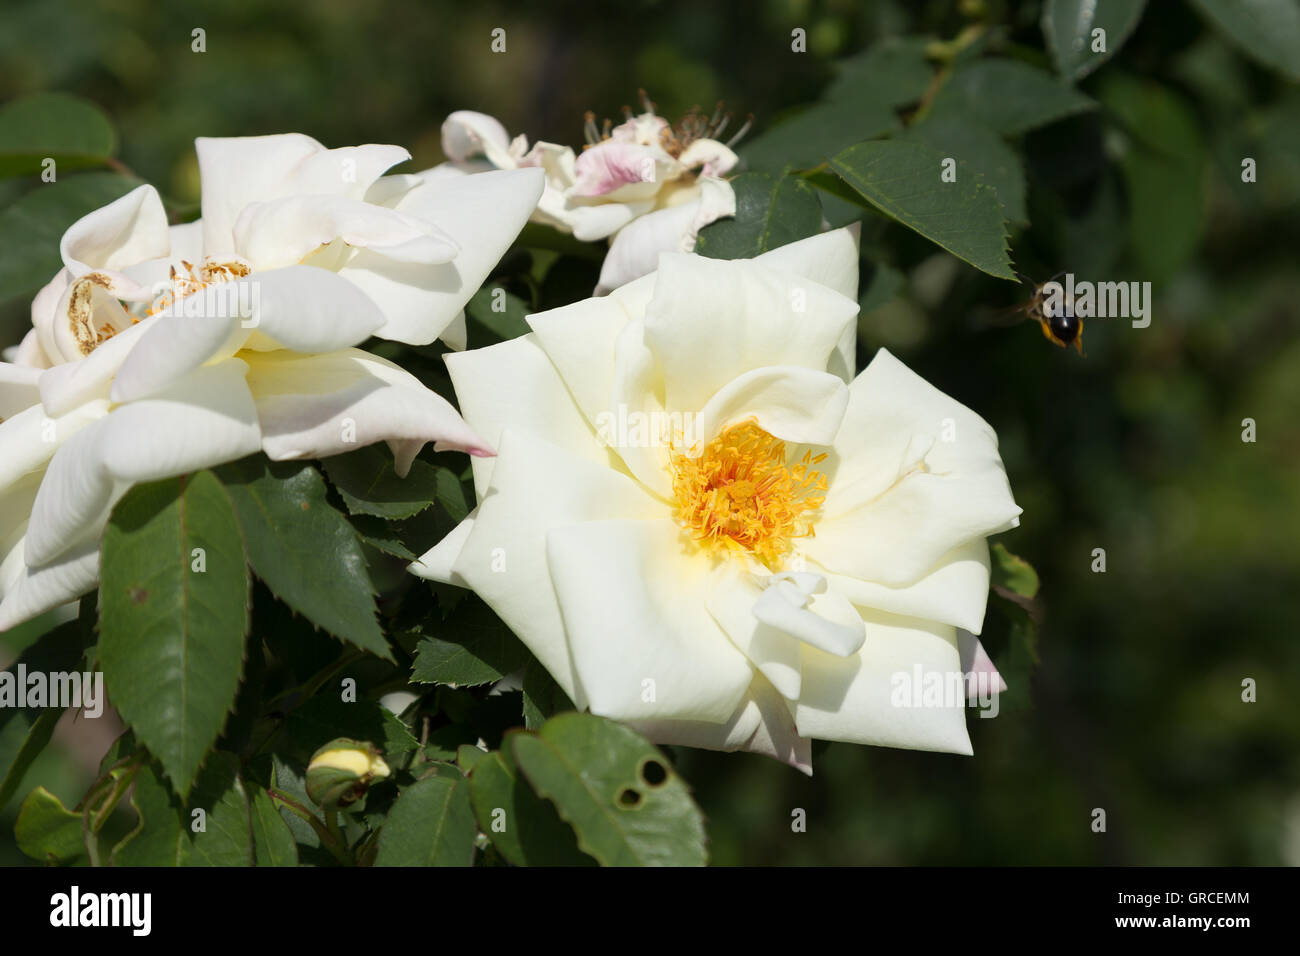 Yellow-White Peasant Rose Blossom With A Bee Approaching Stock Photo